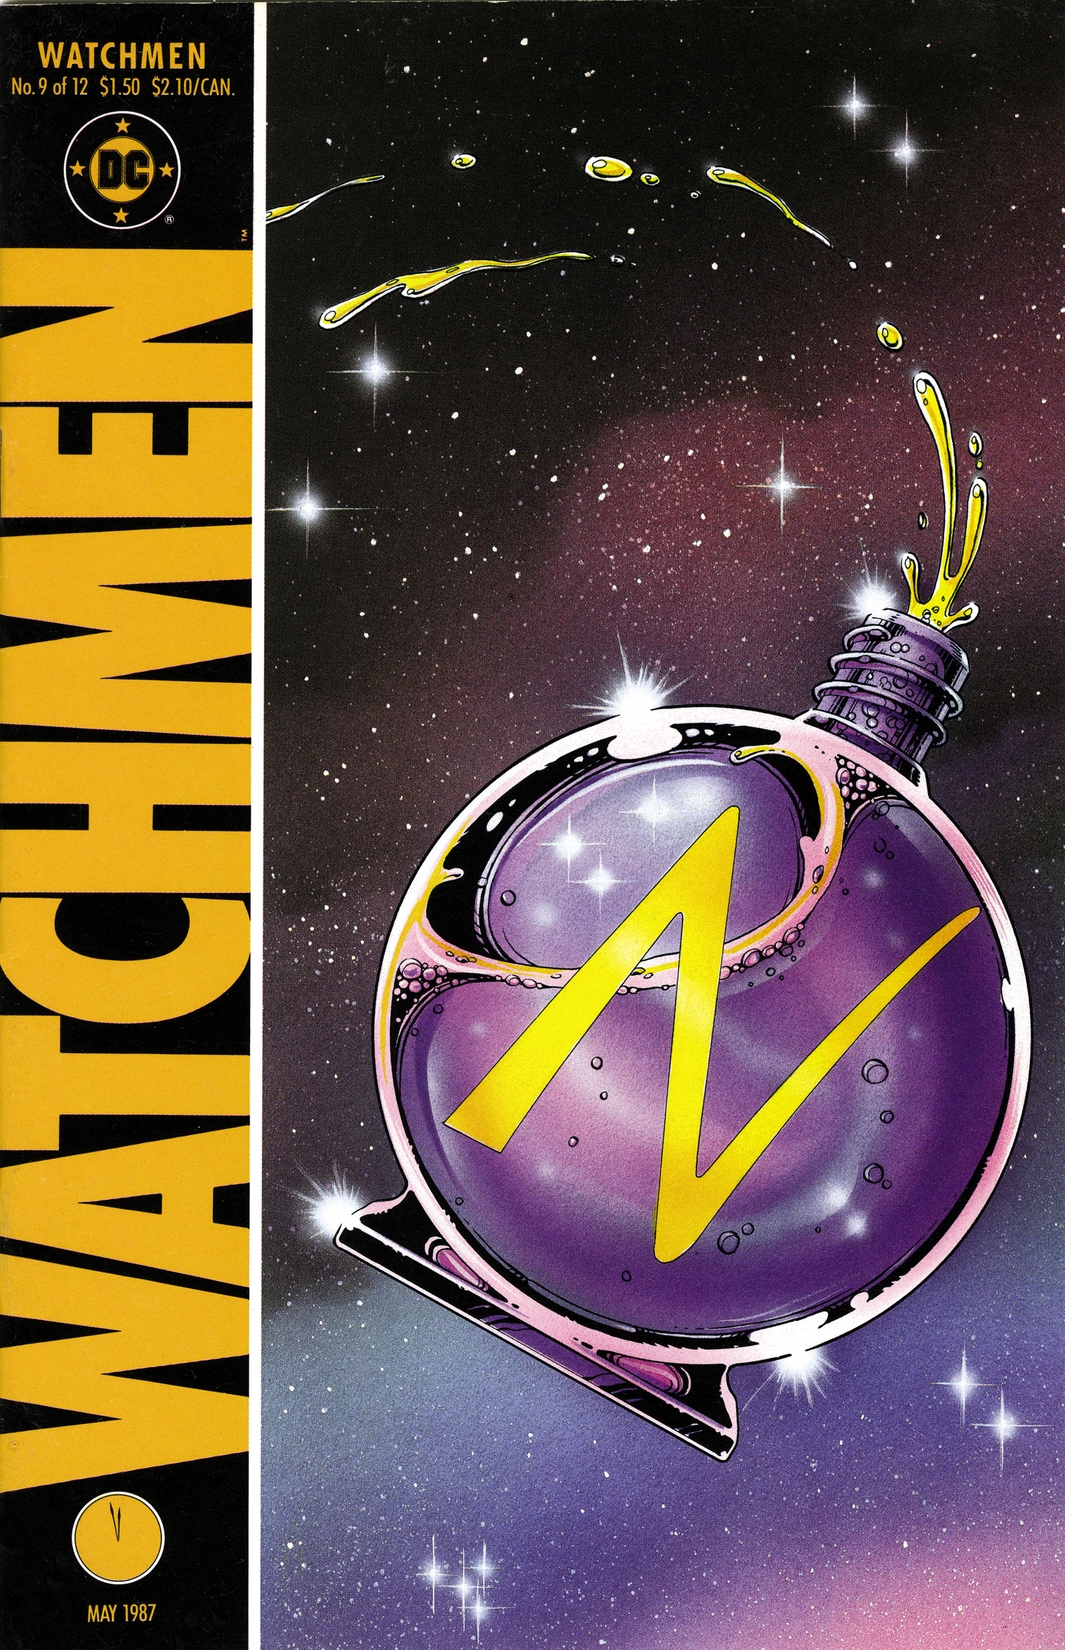 Watchmen #9 preview images